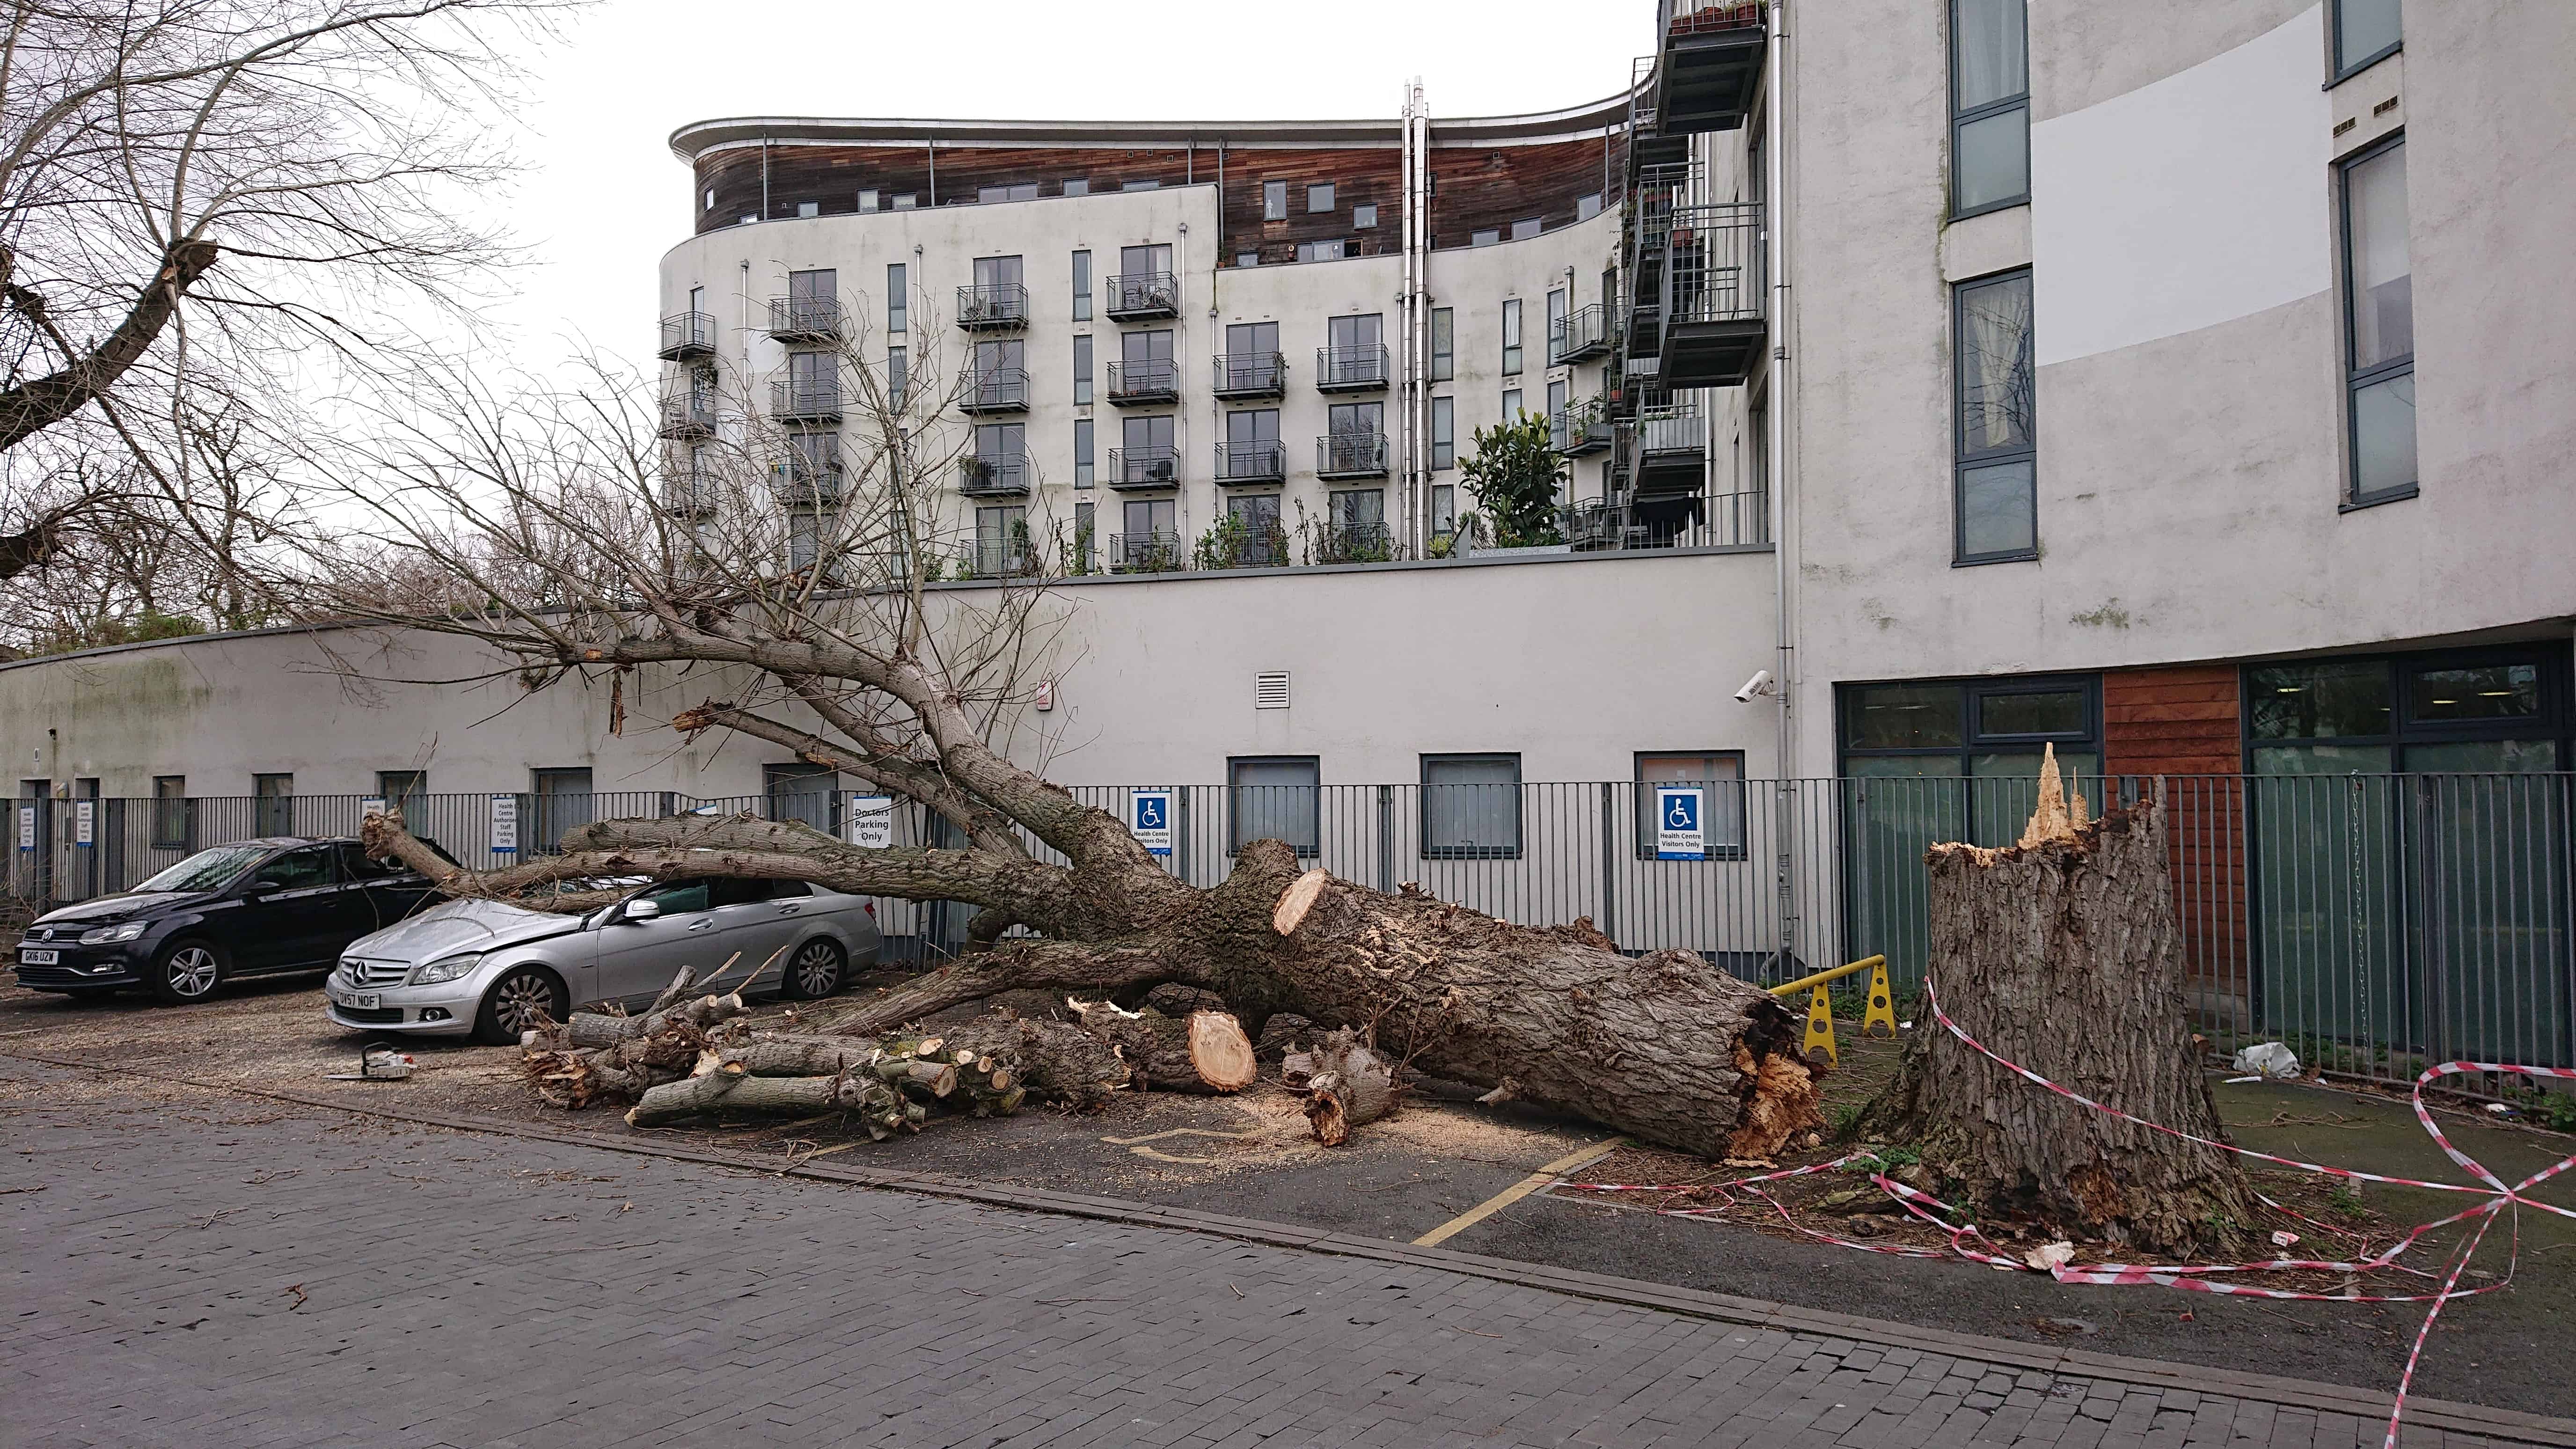 The tree fell down during heavy weather in Bermondsey, smashing three cars